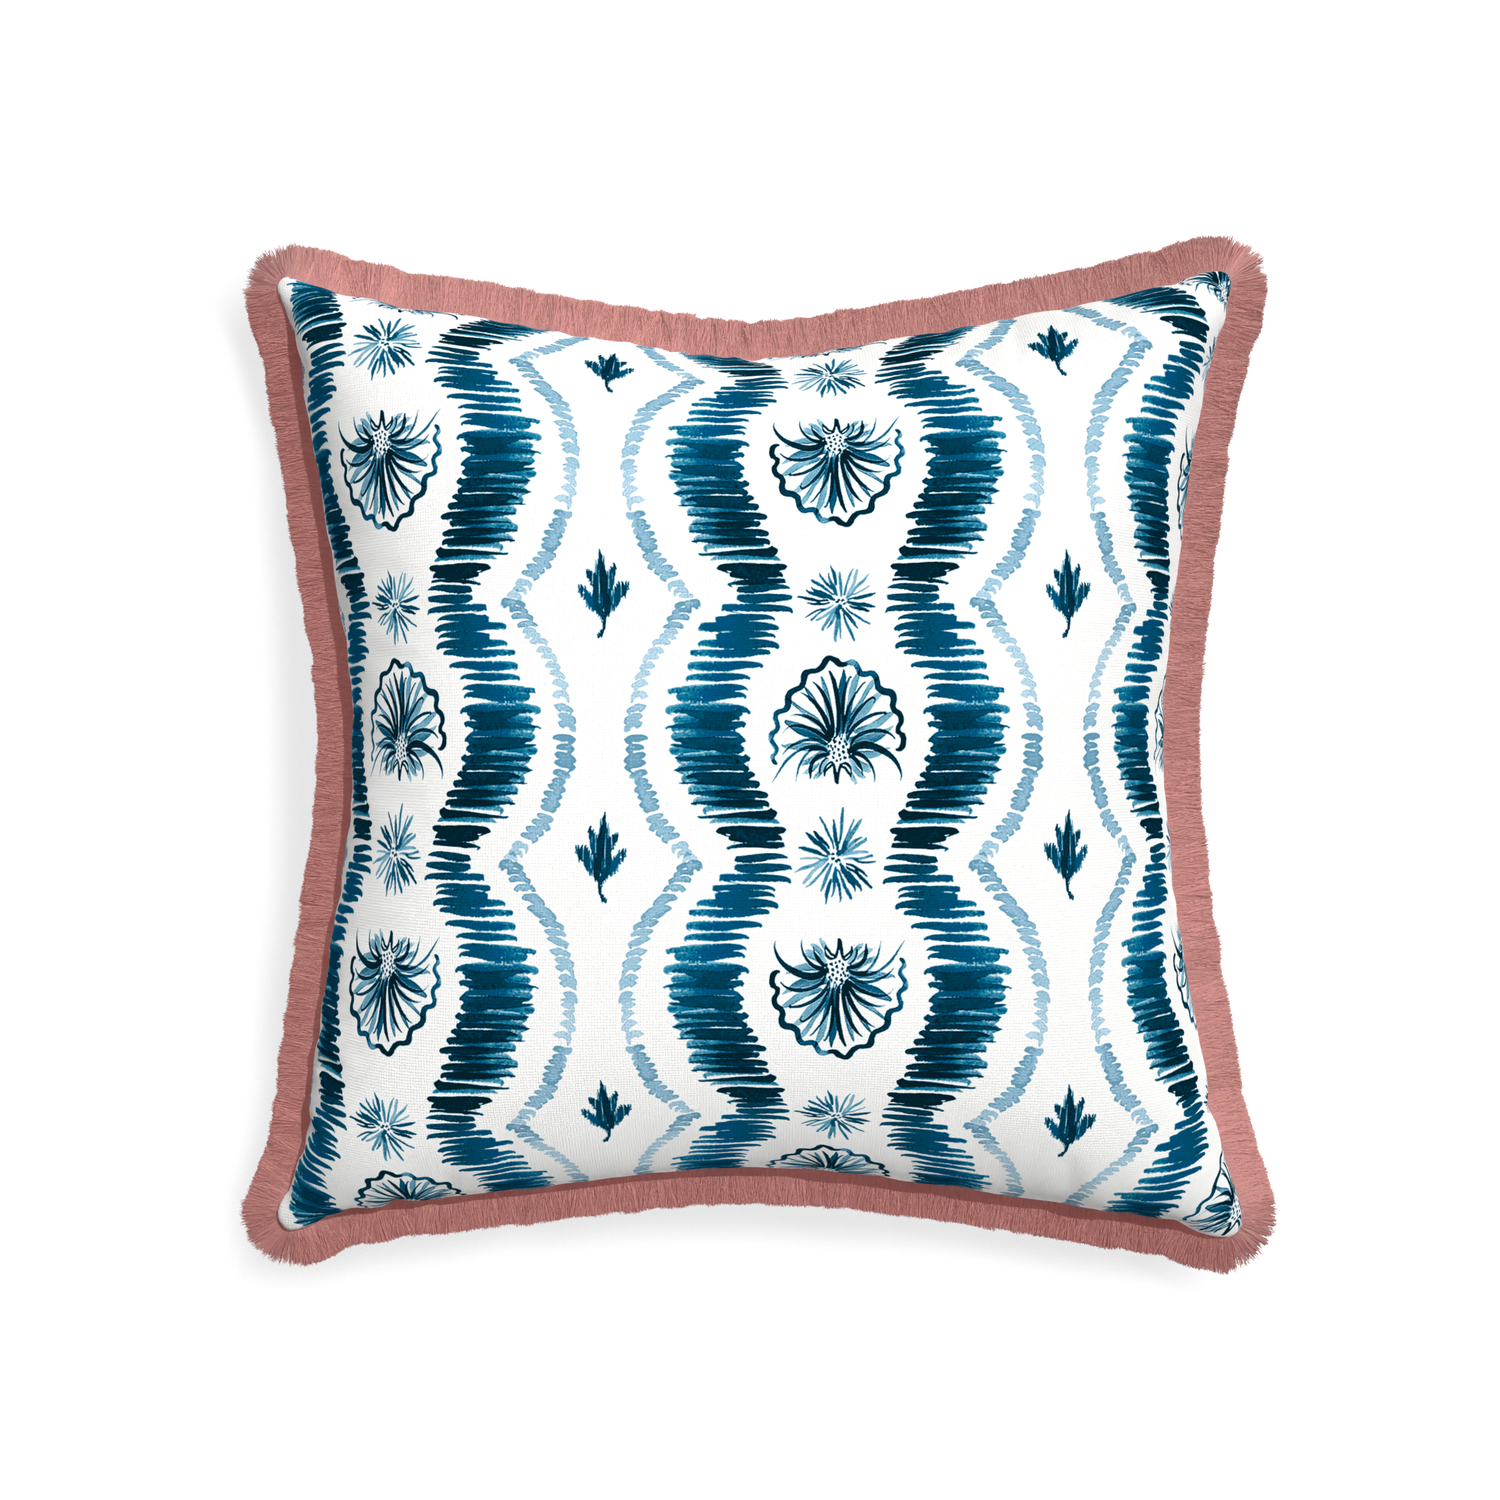 22 inch Square Blue Ikat Stripe Pillow with dusty rose fringe